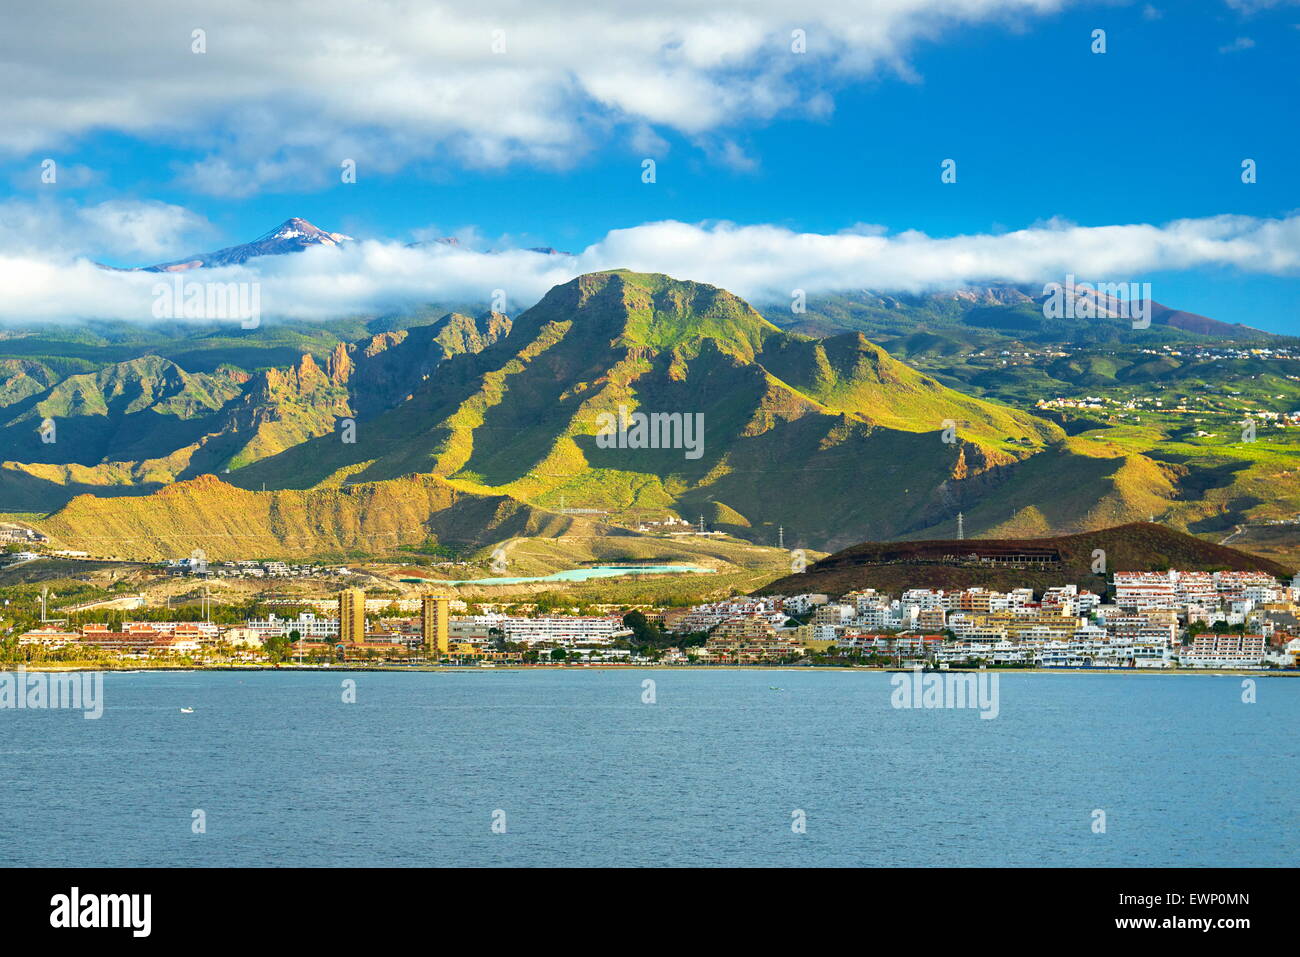 Teide Mount and Los Cristianos town, Tenerife, Canary Islands, Spain Stock Photo